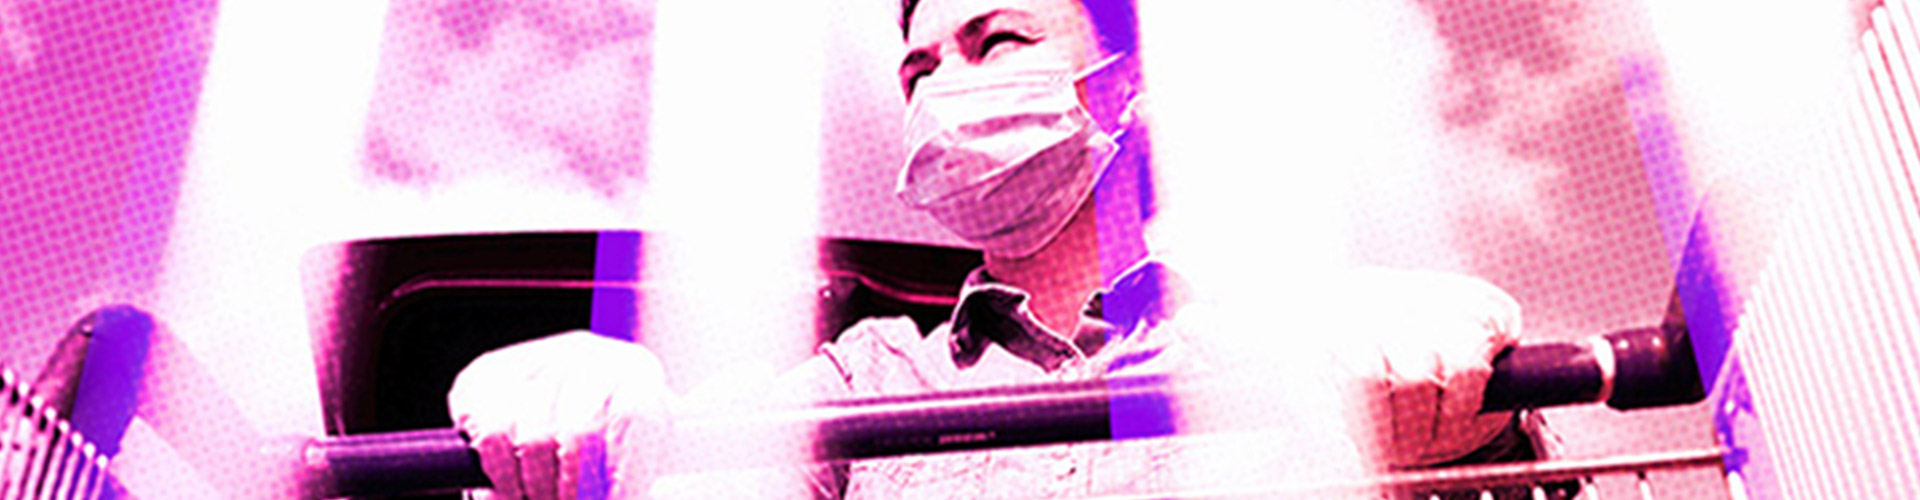 Finding The Next Normal in a Post COVID-19 Beauty World blog banner featuring masked and gloved worker pushing carts